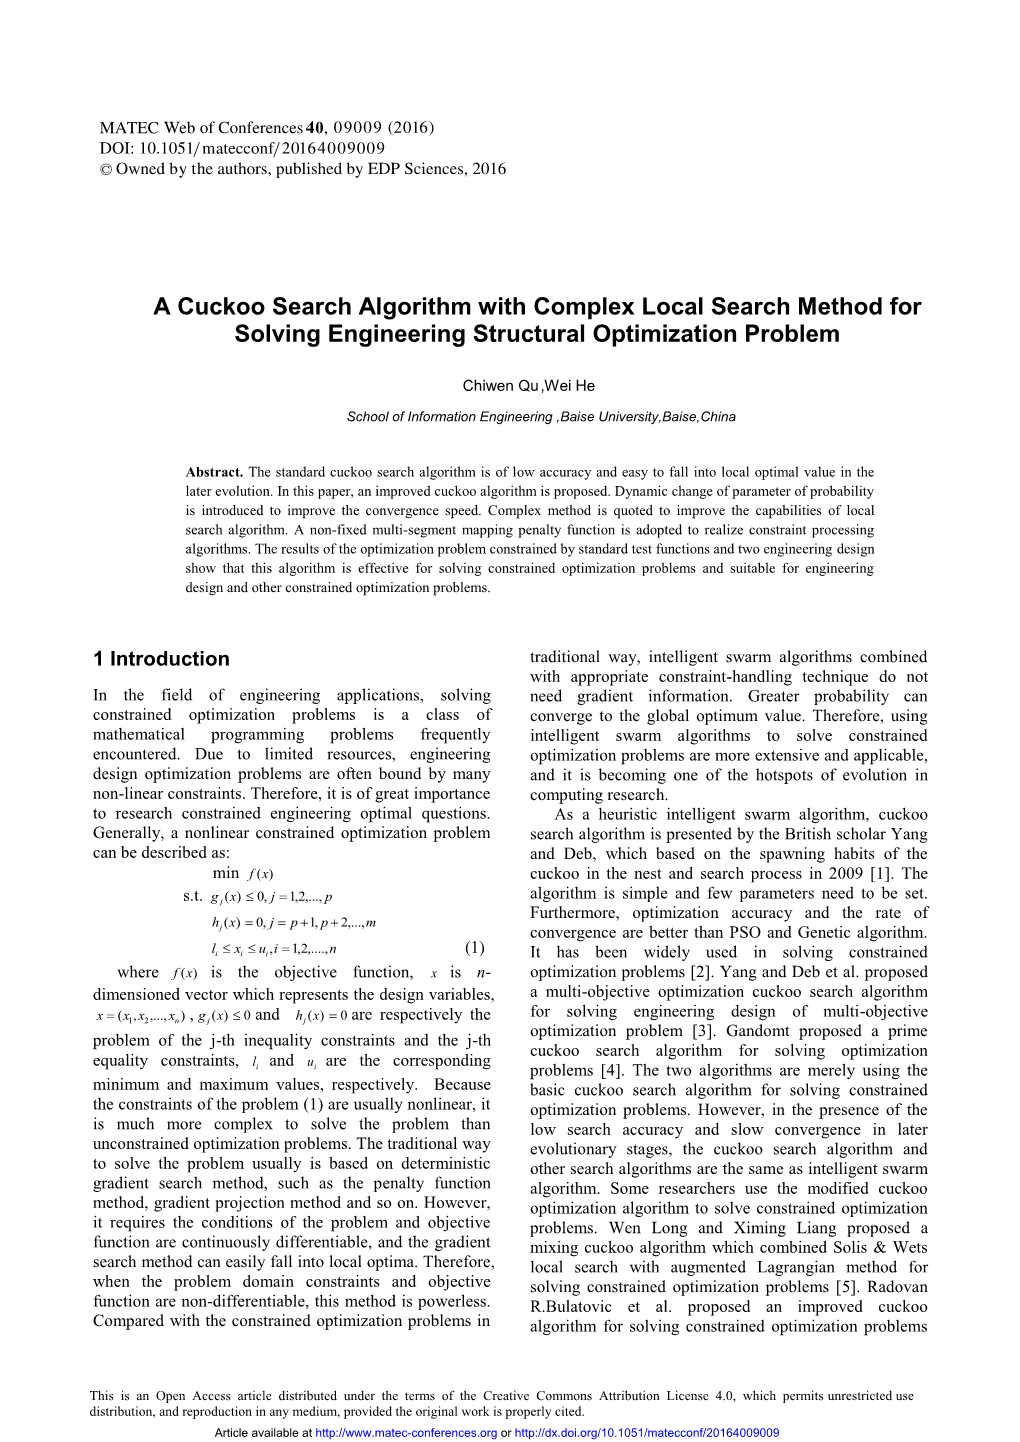 A Cuckoo Search Algorithm with Complex Local Search Method for Solving Engineering Structural Optimization Problem